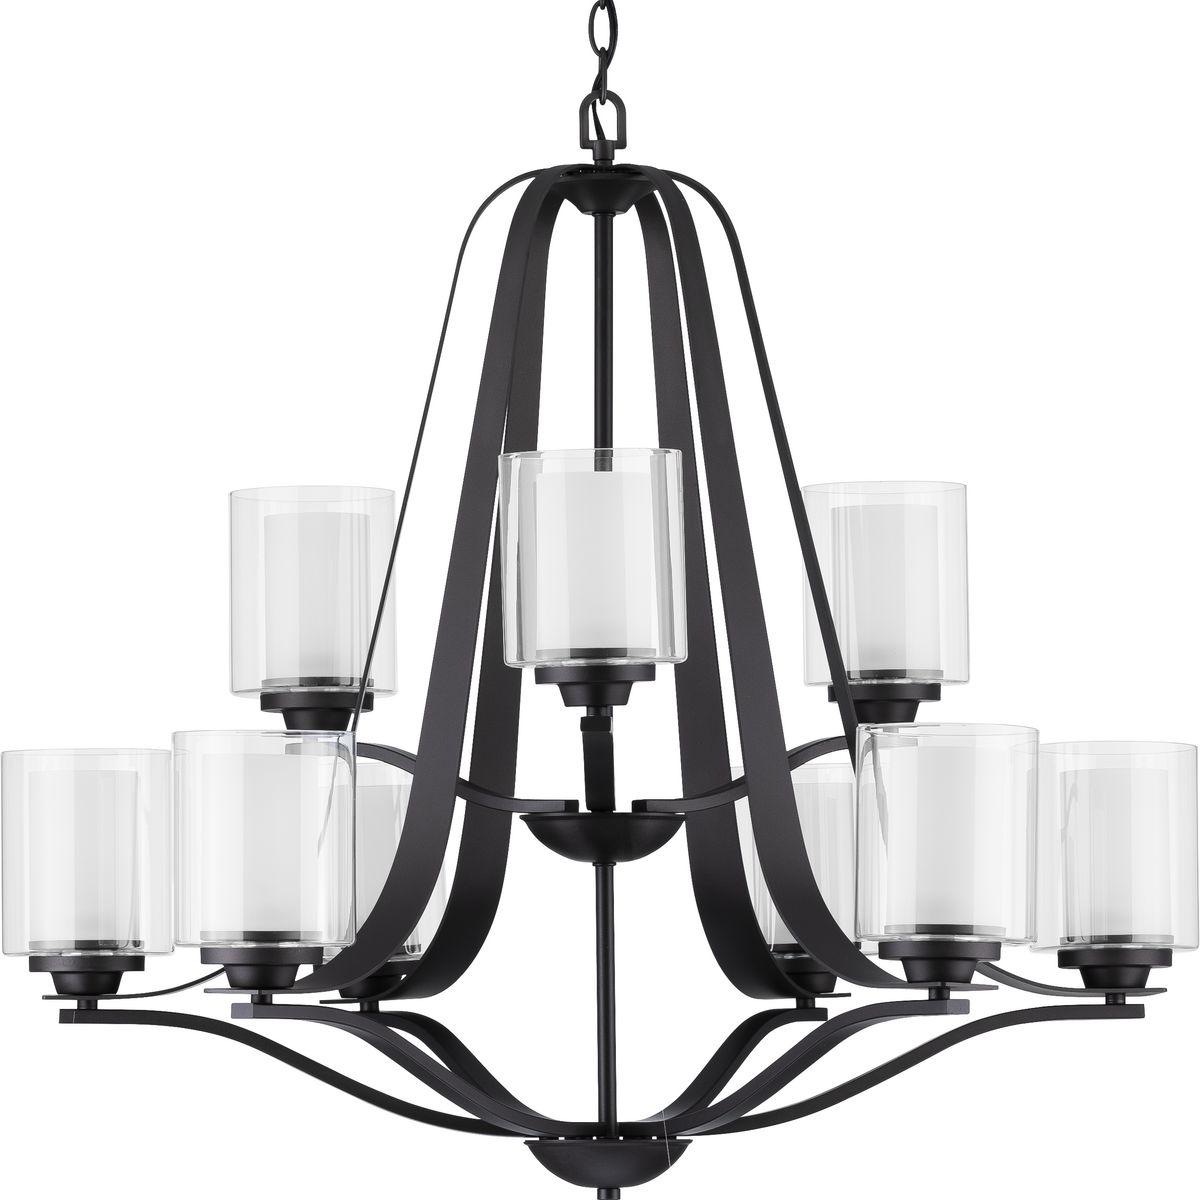 Hubbell P400096-143 Add a modern romance to the heart of your home with this lovely chandelier. Quiet etched glass diffusers are surrounded by clear outer glass shades for a soft, luxurious touch. The shades sit on an elegant graphite frame with gently flowing arms.  ; Quiet